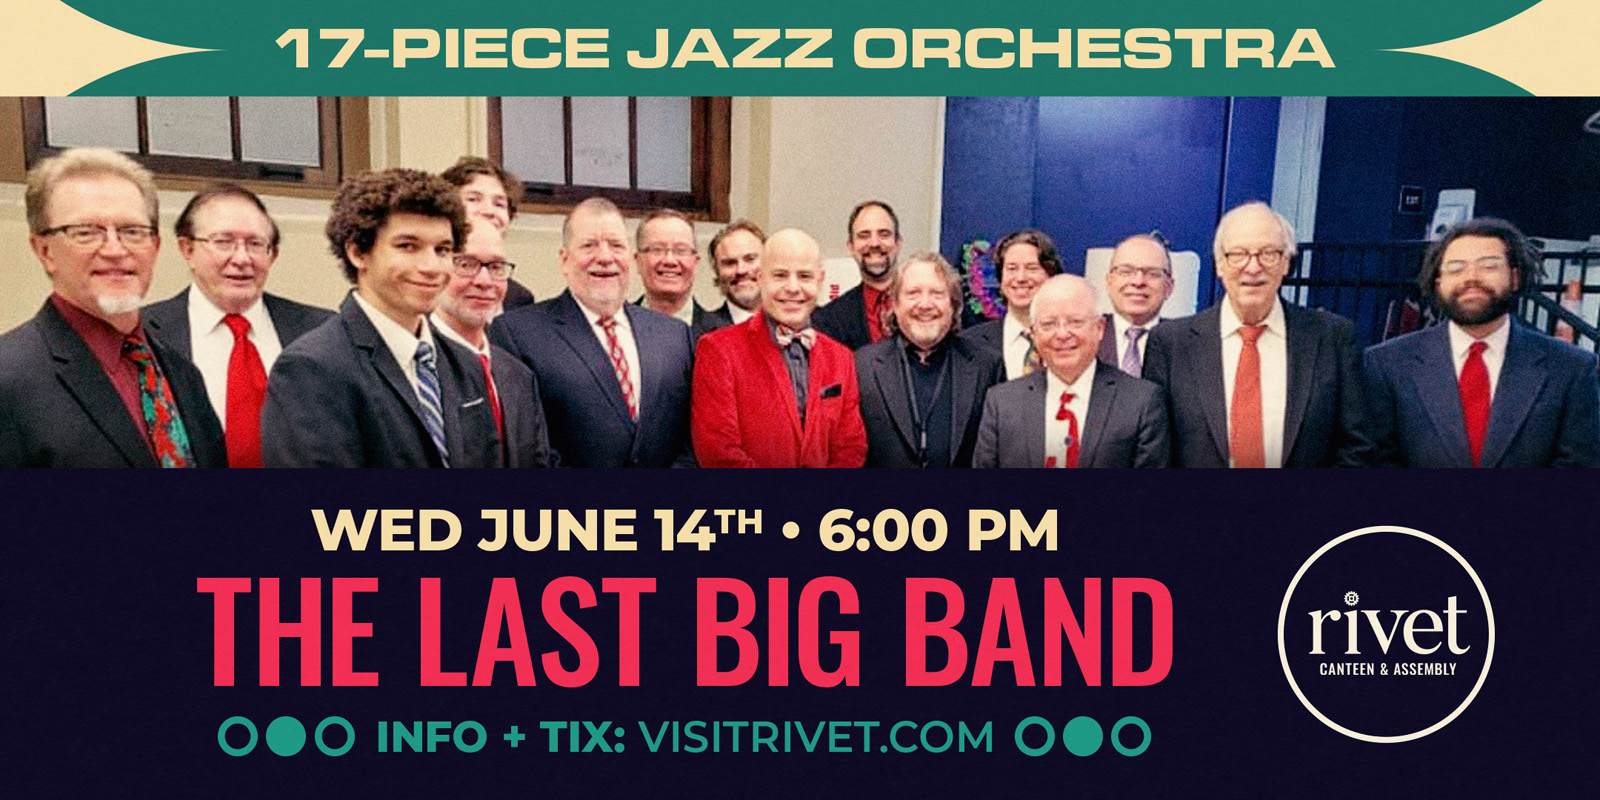 The Last Big Band will ber performing live at Rivet: Canteen & Assembly on Wednesday, June 14th, 2023. Each performance keeps getting better and better! Join us!